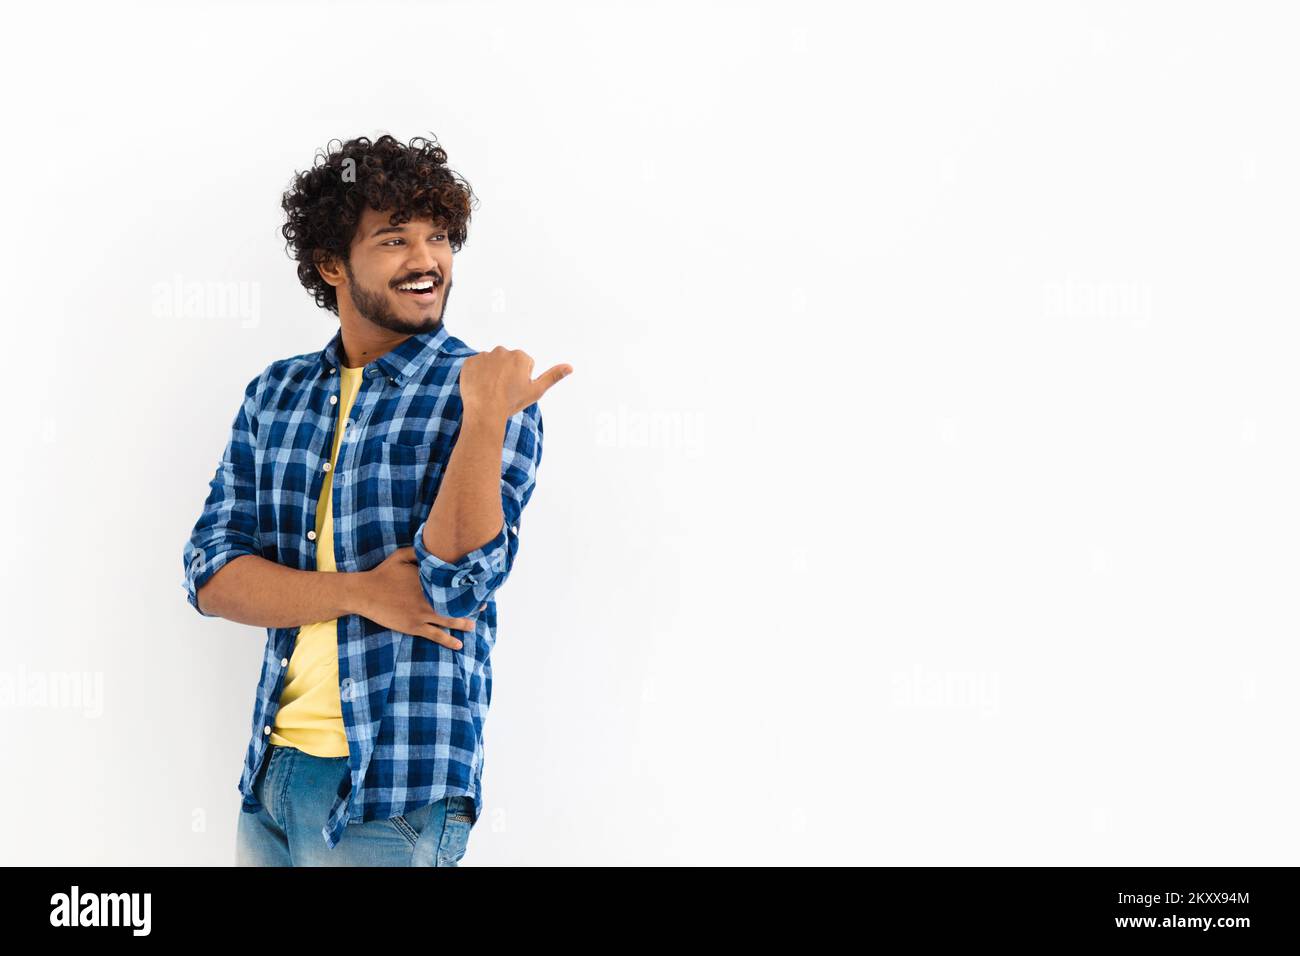 Young Asian man with curly hair and casual stylish clothes smiling with his finger pointing on a white background Stock Photo